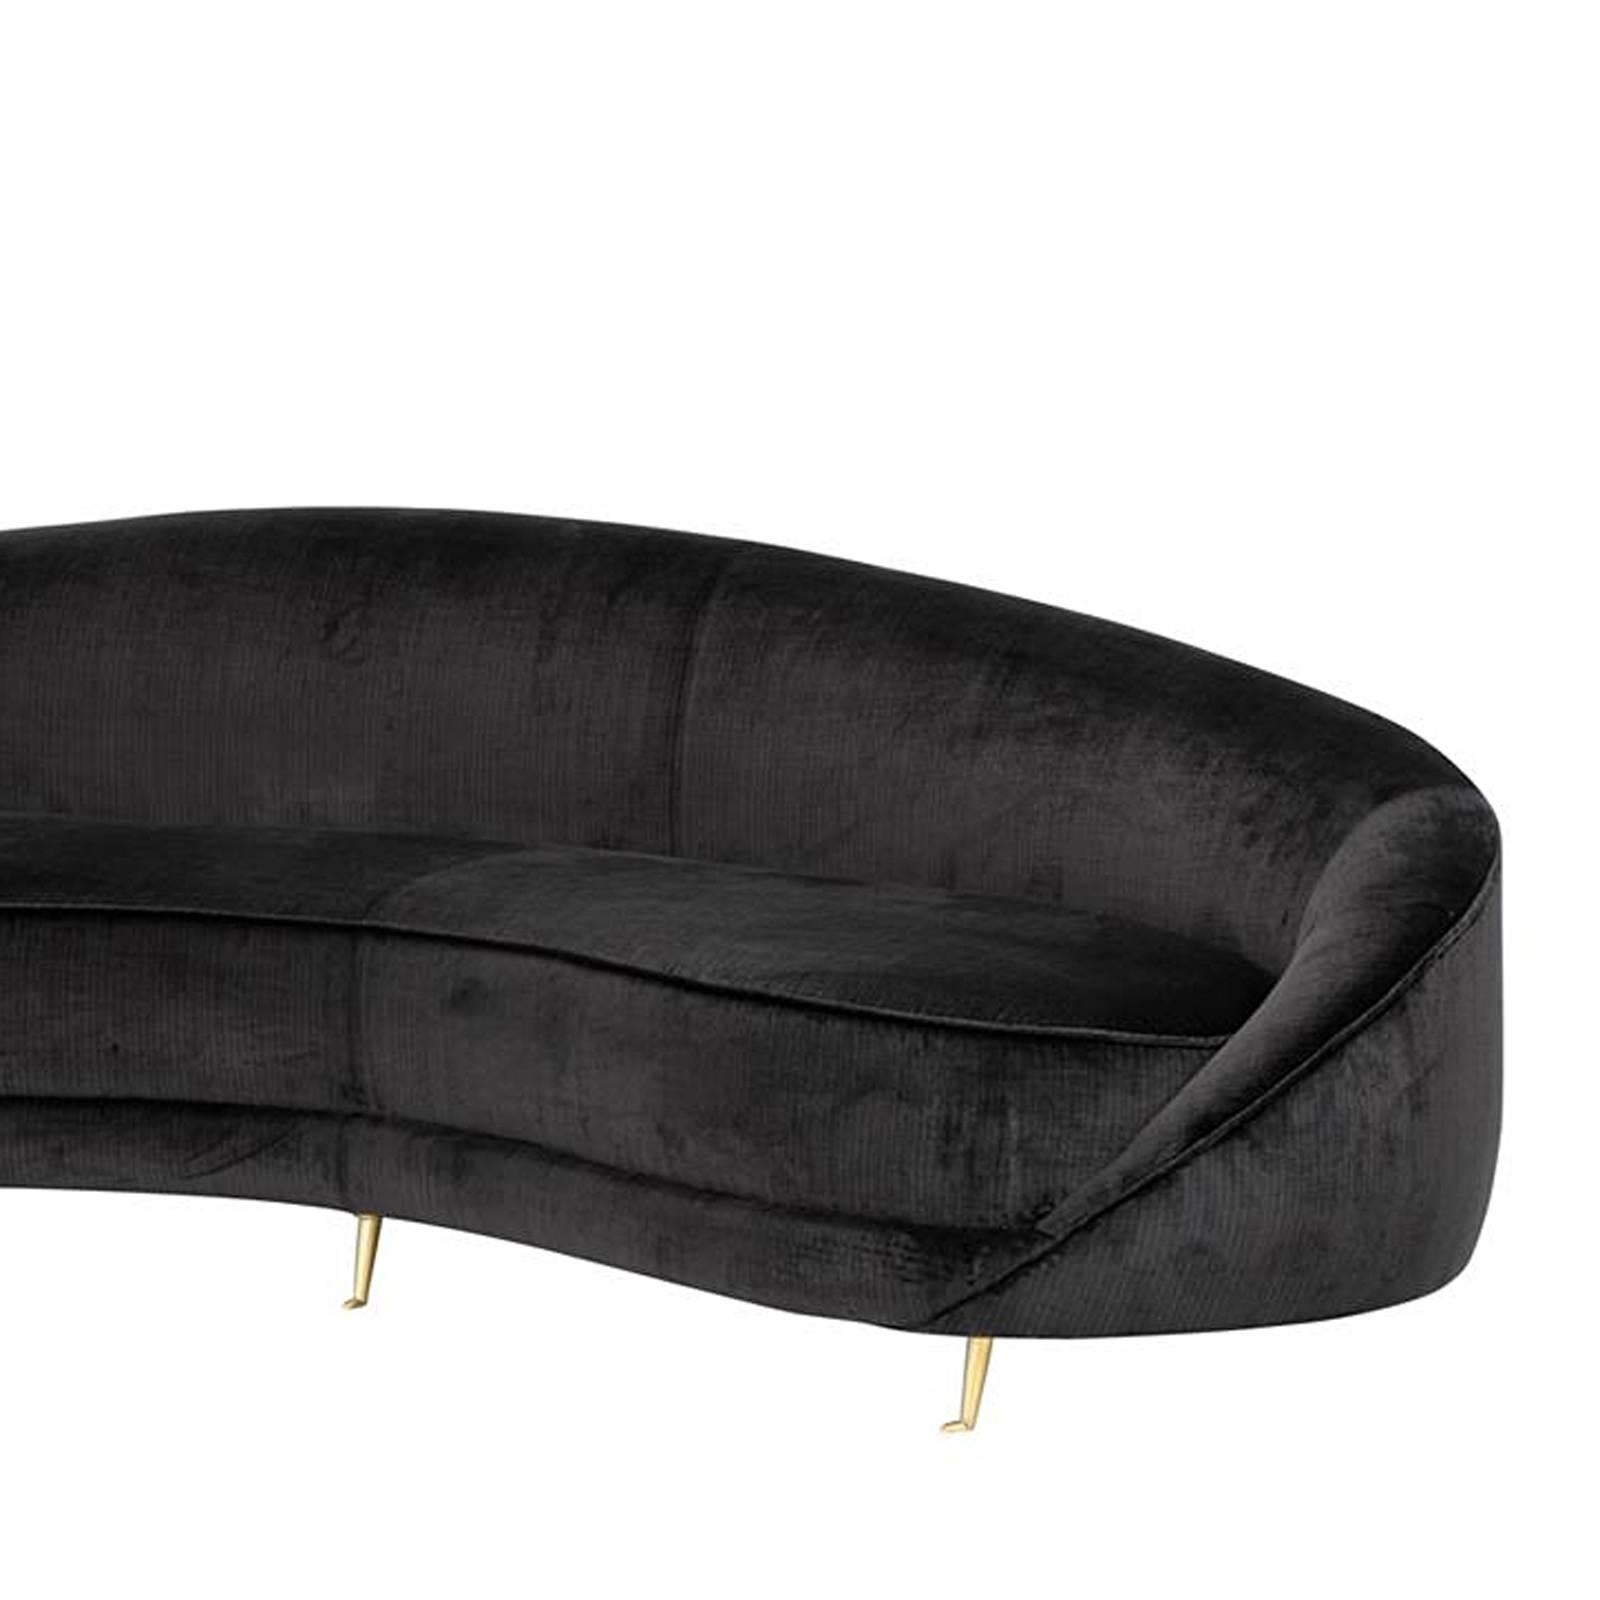 Chinese Arabella Sofa with Black Fabric and Brass Legs